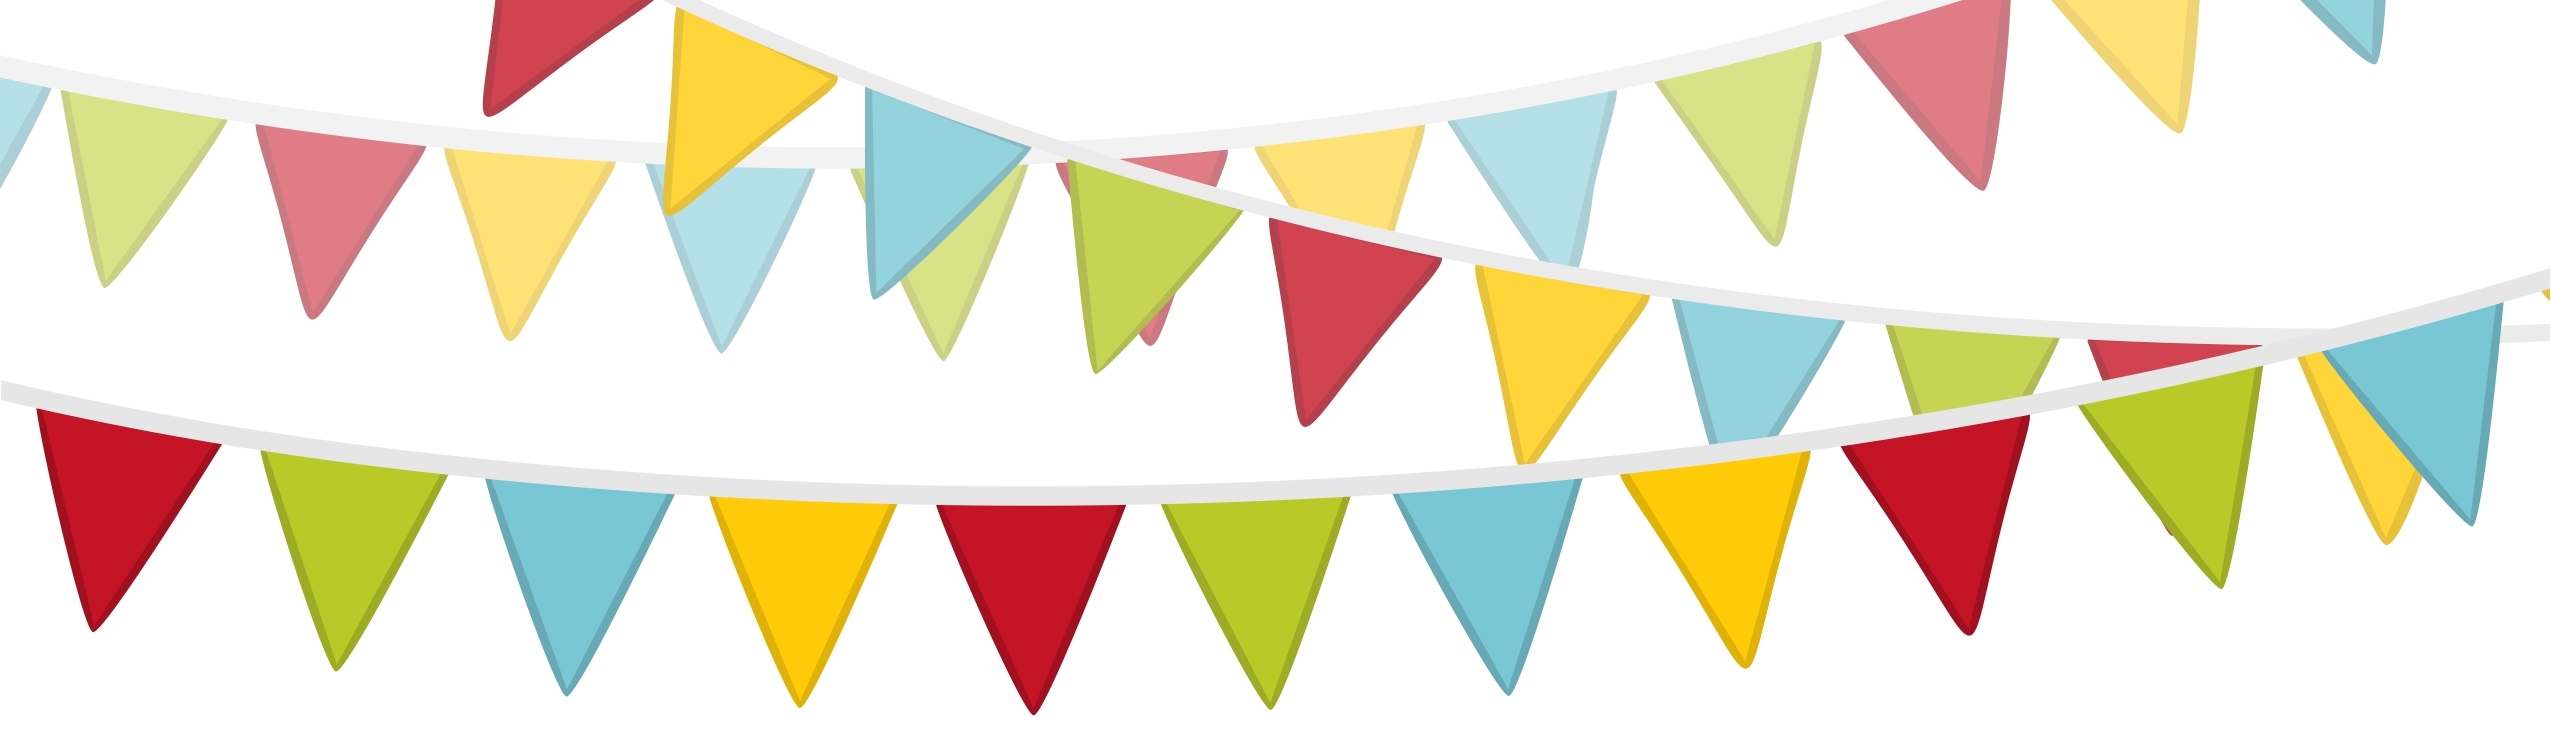 free clipart images bunting - photo #38